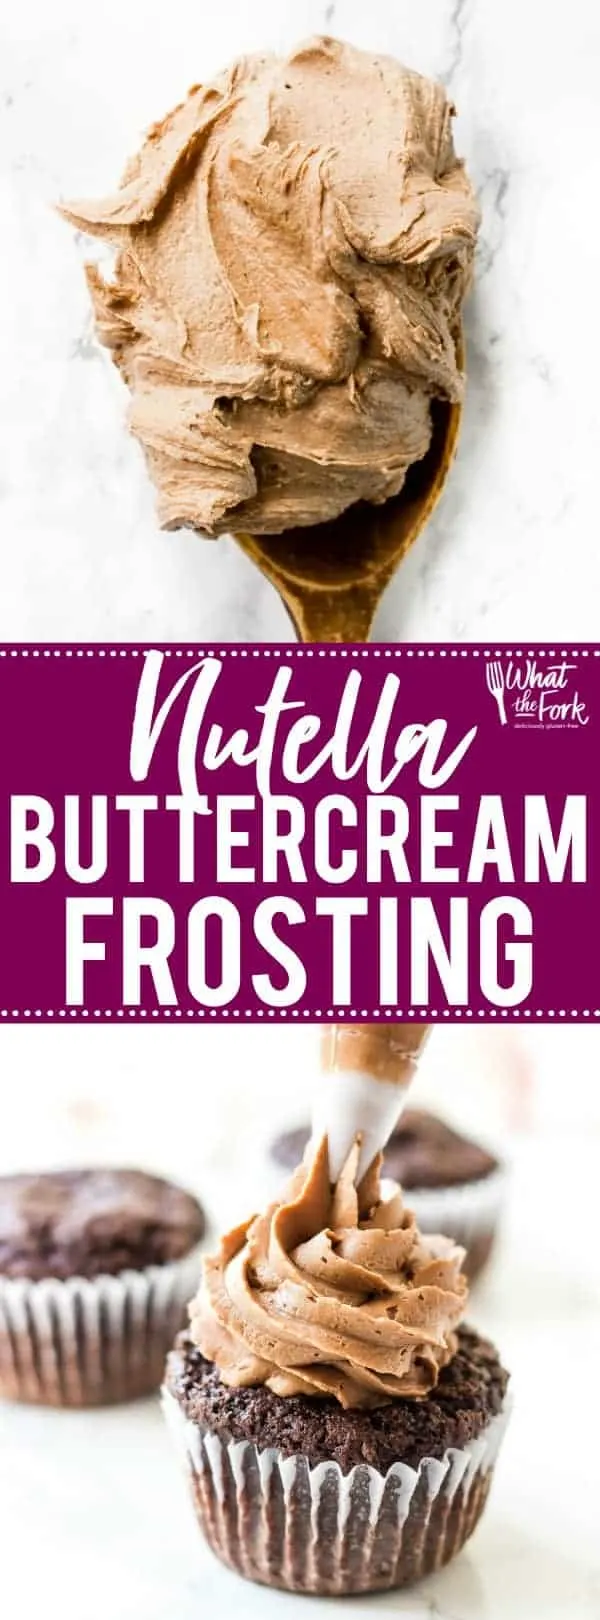 This creamy, dreamy Nutella Buttercream Frosting recipe is the frosting recipe you’ve been missing. It’ll easily replace your standard chocolate buttercream frosting recipe for anything you make. It’s great for spreading or piping on cupcakes, cakes, brownies, or cookies. You’ll love it! Recipe from @whattheforkblog | whattheforkfoodblog.com | easy homemade frosting recipes | how to make Nutella buttercream frosting | how to make frosting with Nutella | #Nutella #chocoalte #frosting #dessert